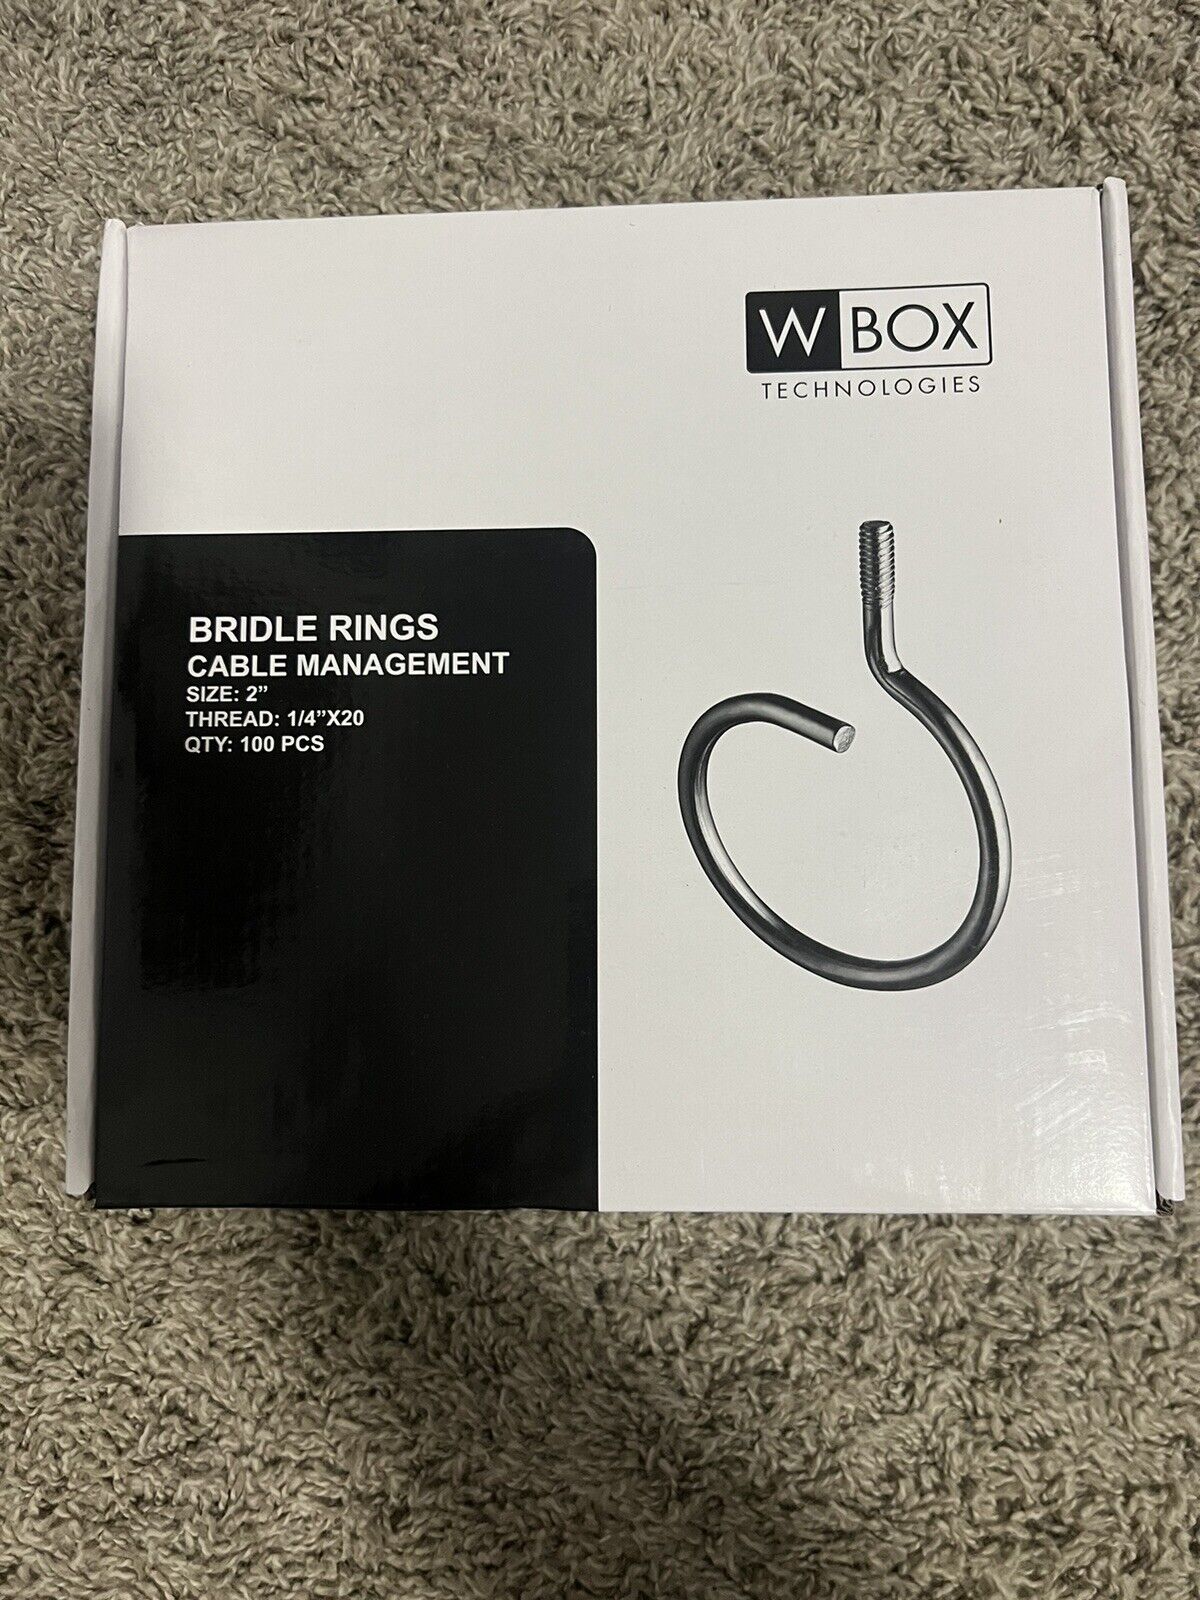 2 Boxes Of W Box Technologies 2” Bridle Rings OE-BR225 Box Of 100 1/4”X20 Thread